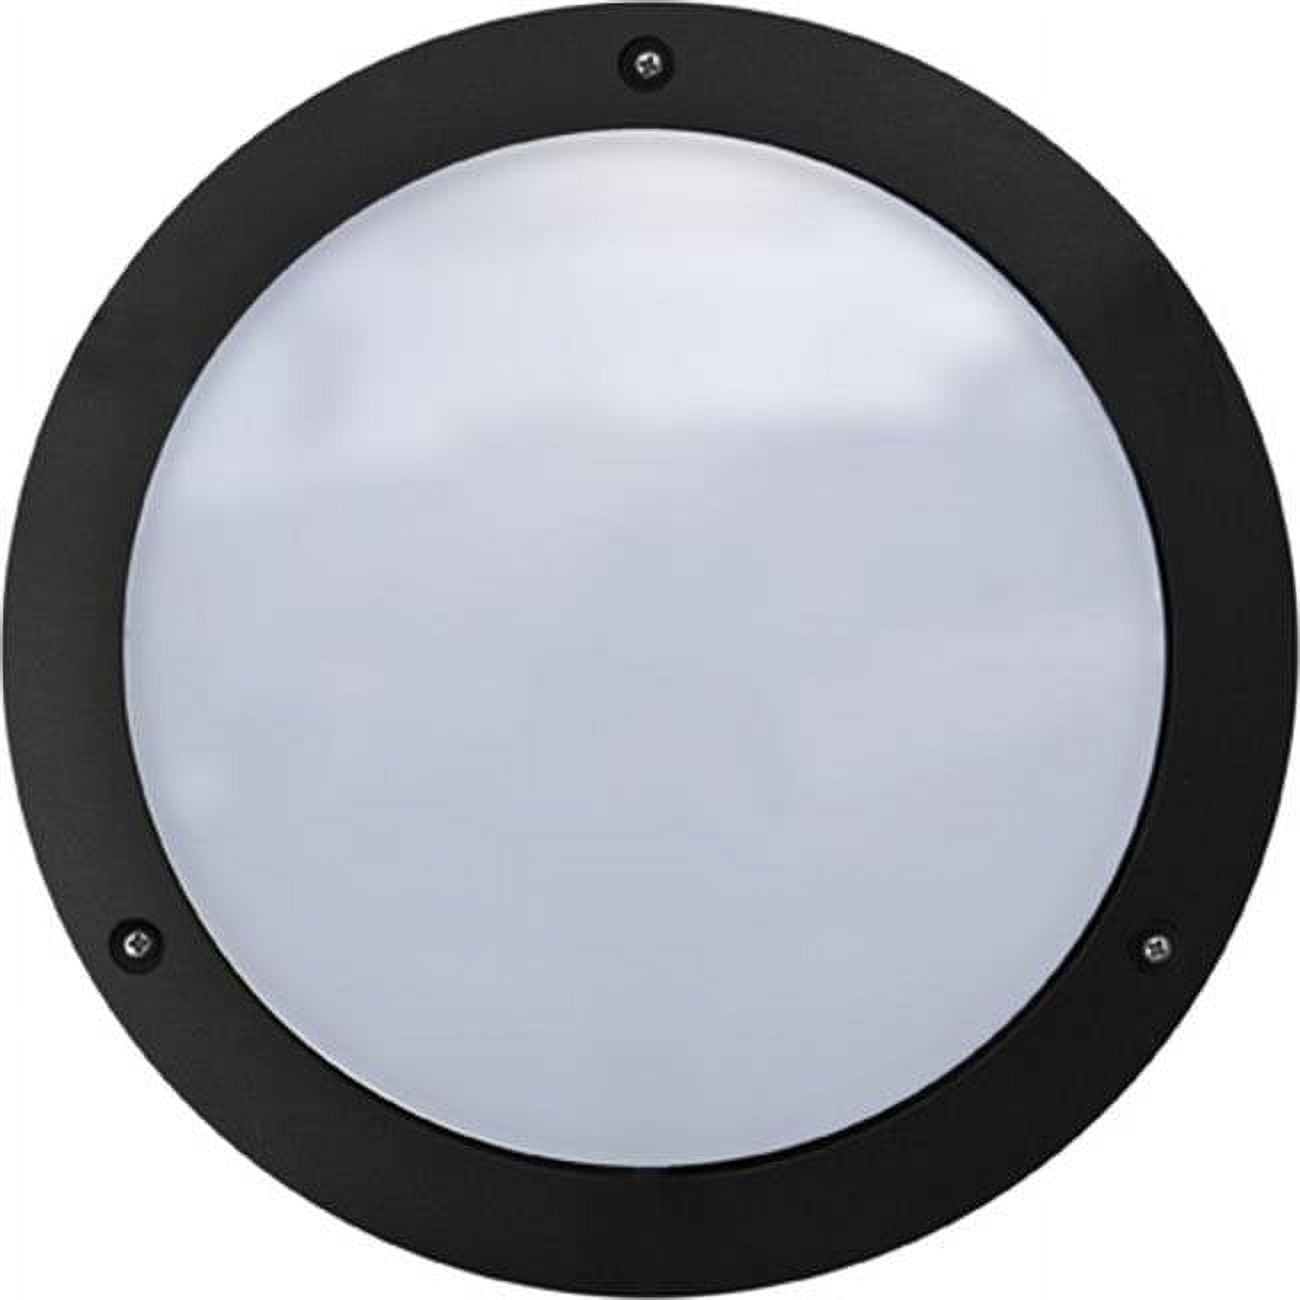 Picture of Dabmar Lighting W3900-B 10.50 x 10.50 x 2.75 in. 120 V 60 watts Incandenscent Type Powder Coated Cast Aluminum Surface Mounted Wall Fixture Light, Black